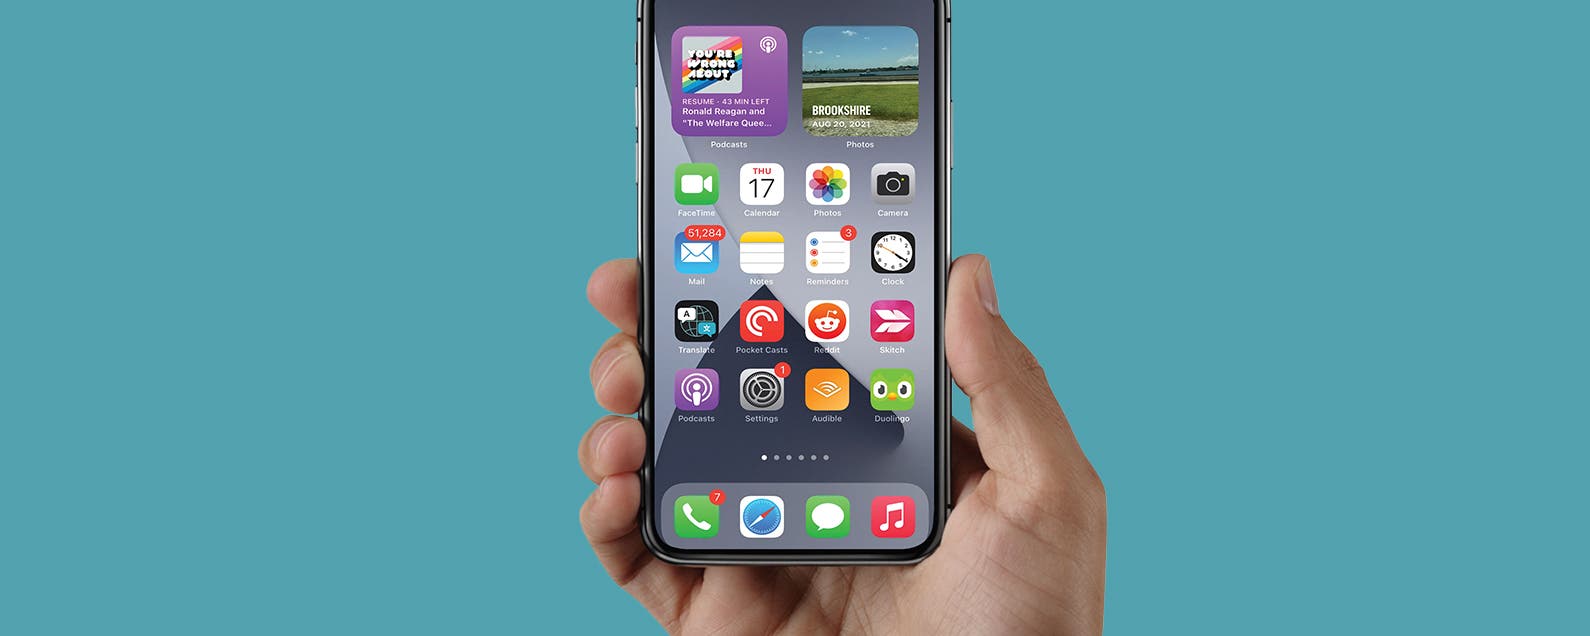 How to Customize Your iPhone Dock in iOS 15